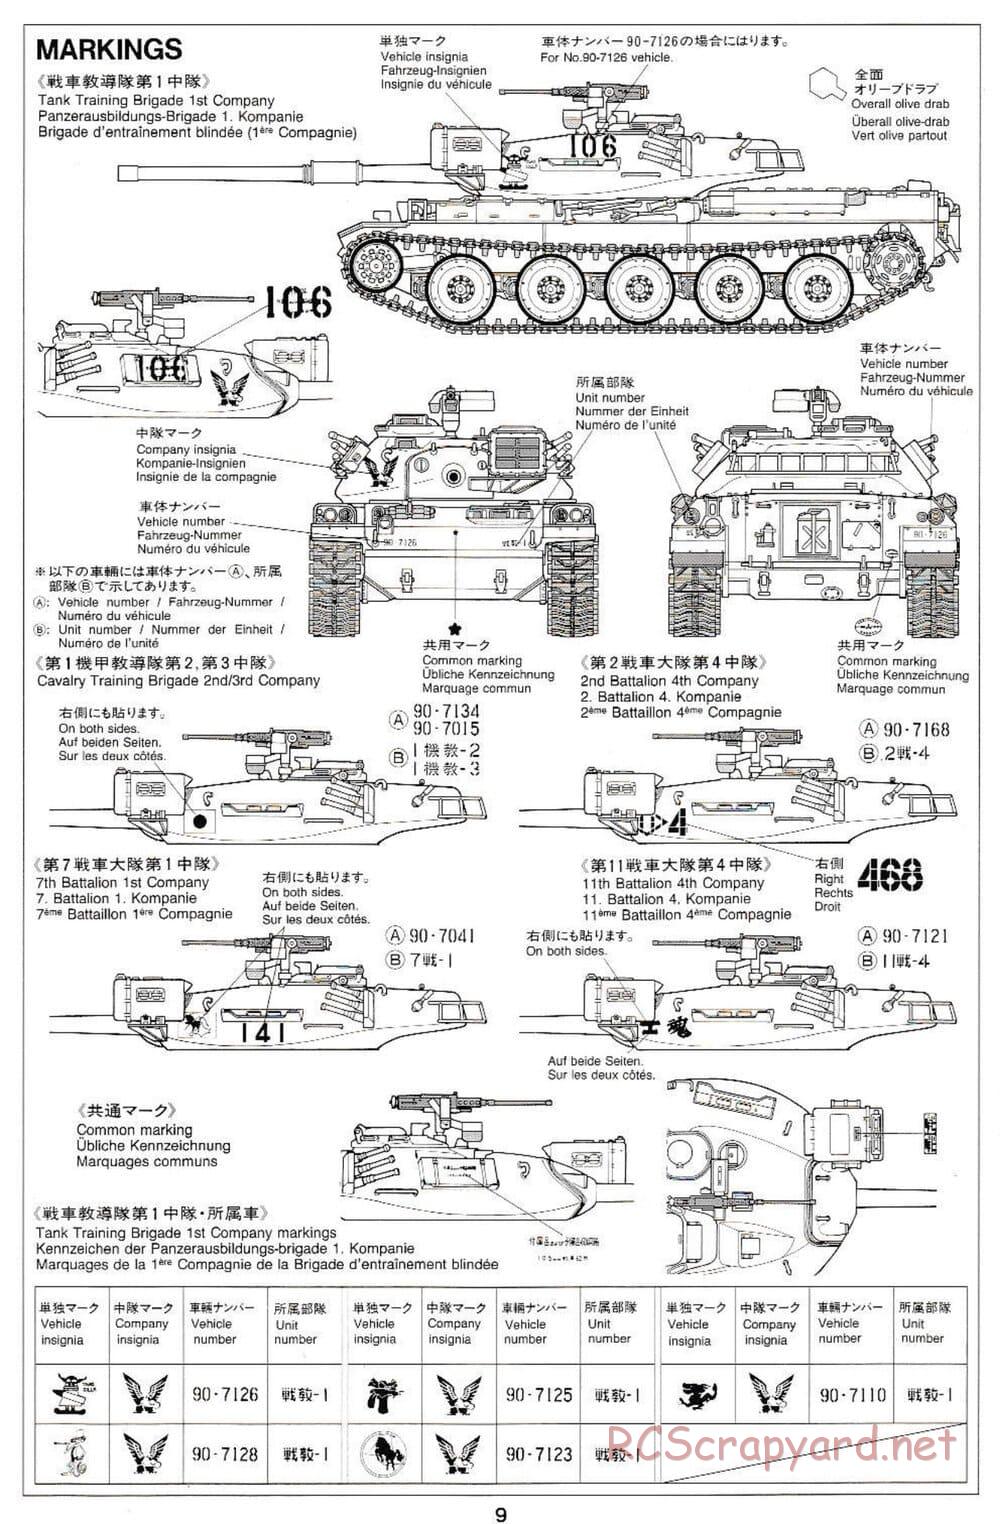 Tamiya - J.G.S.D.F. Type 74 - 1/35 Scale Chassis - Manual - Page 9